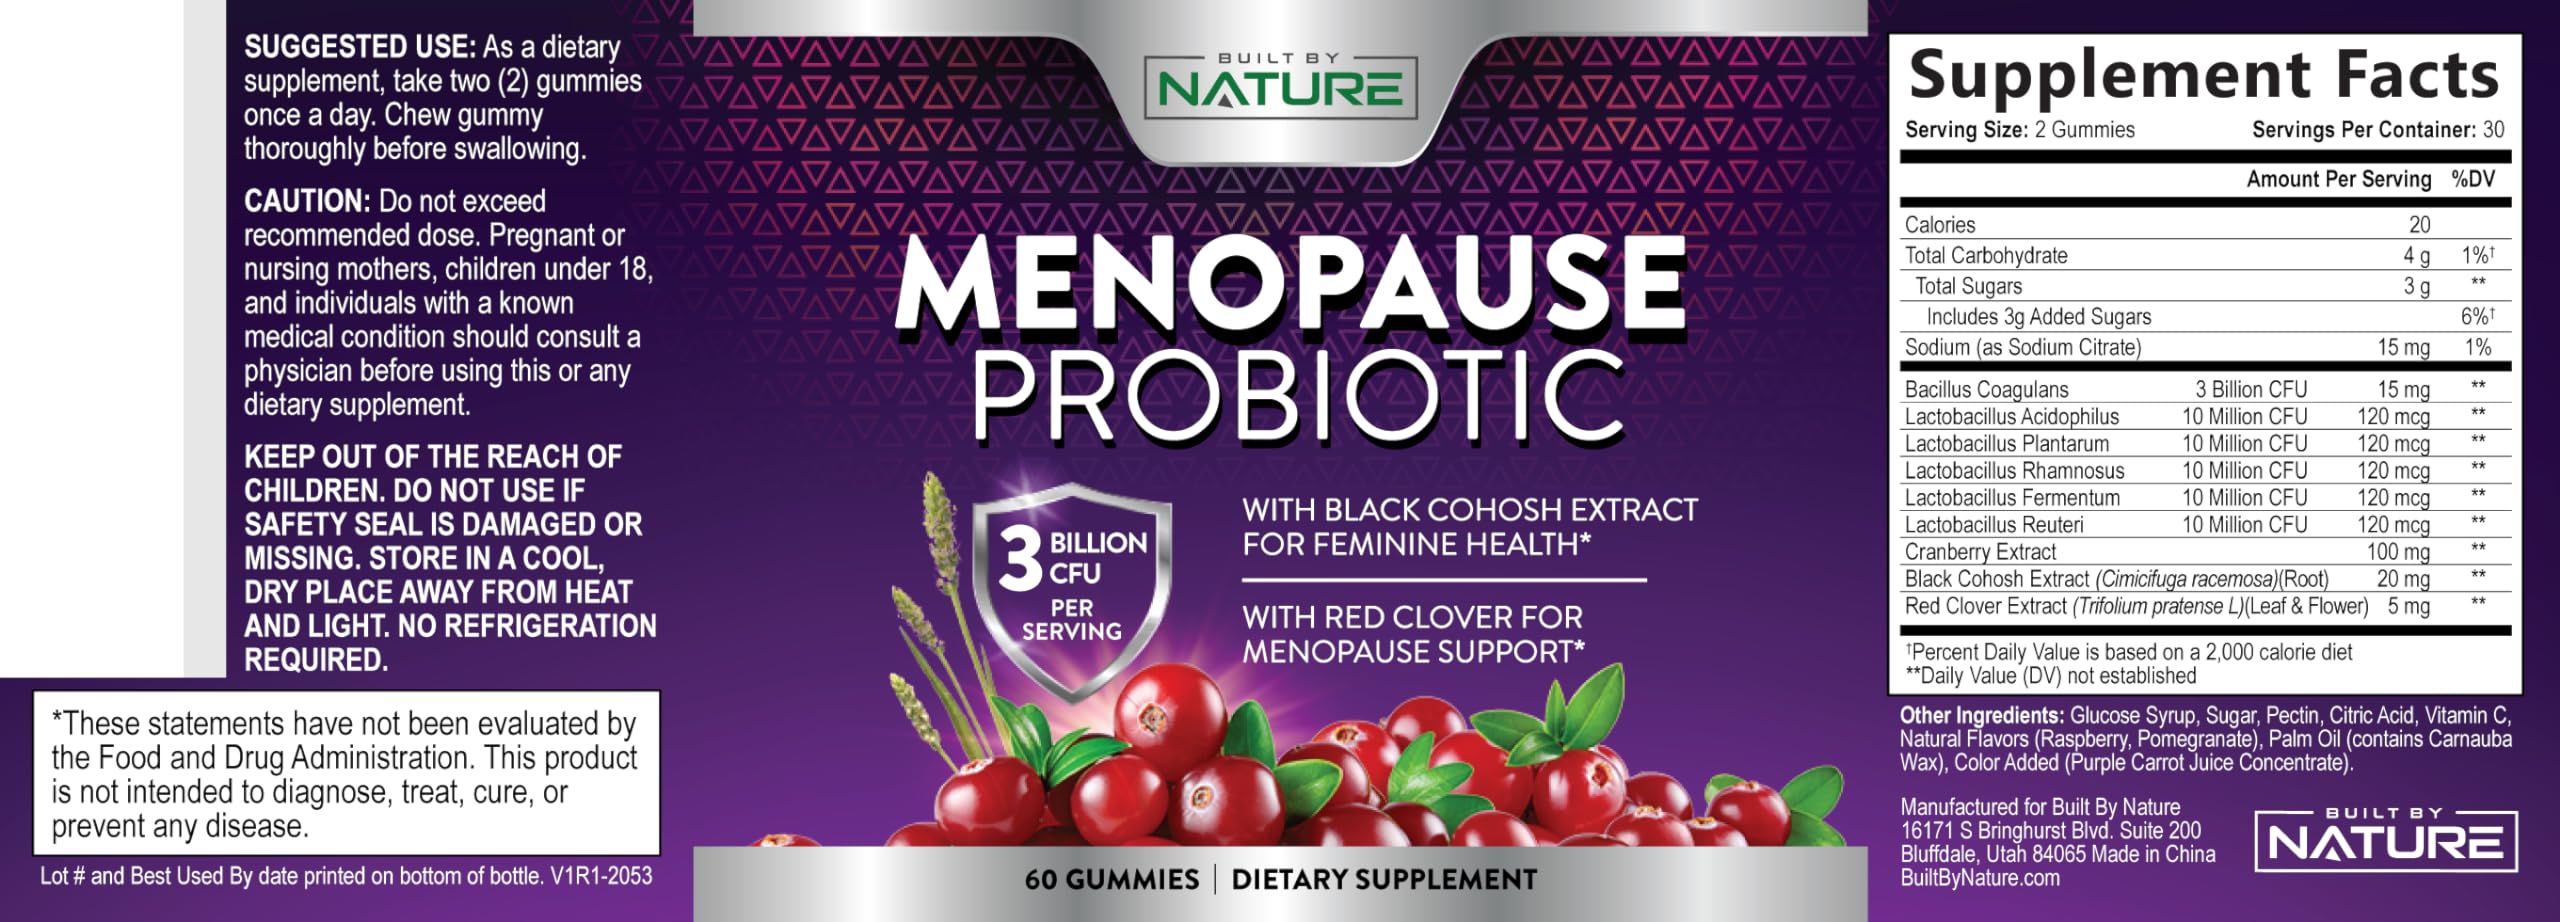 Menopause Probiotic Gummies - Thermogenic Probiotics Gummy Supplement for Women – Mood Support & Hormone Balance for Hot Flashes, Night Sweats with Cranberry, Black Cohosh & Red Clover - 60 Gummies